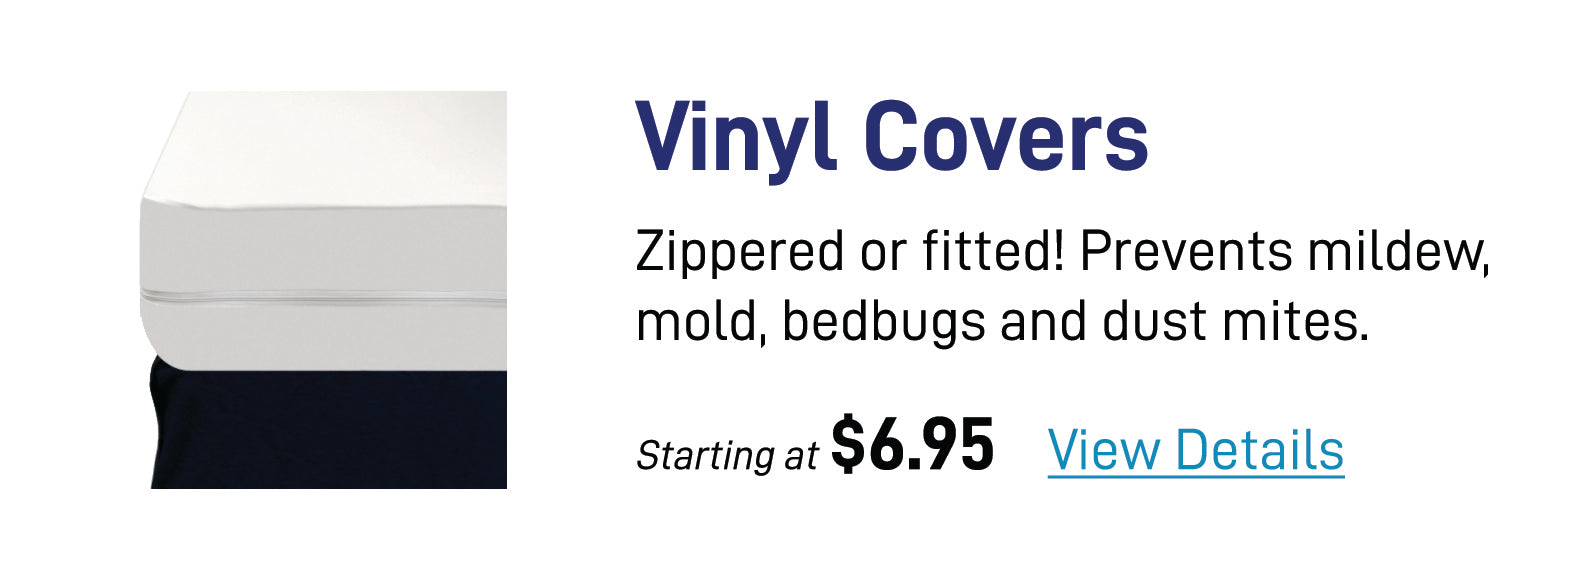 Vinyl Covers - Zippered or Fitted! Prevents mildew, mold, bedbugs and dust mites!